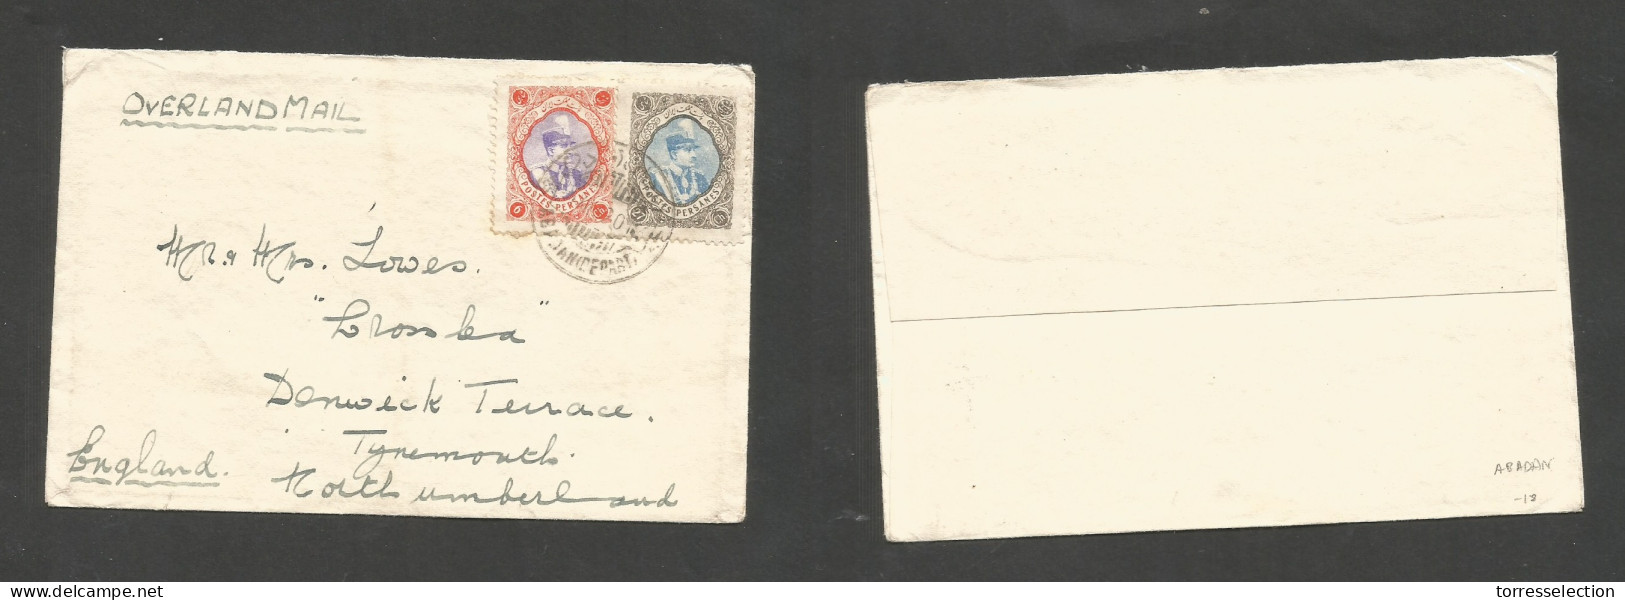 PERSIA. 1932 (21 Dec) Ahaulan - England, Tyne Mouth. Overland Mail Multifkd Env. At 33d Rate, Cds. Fine. SALE. - Iran